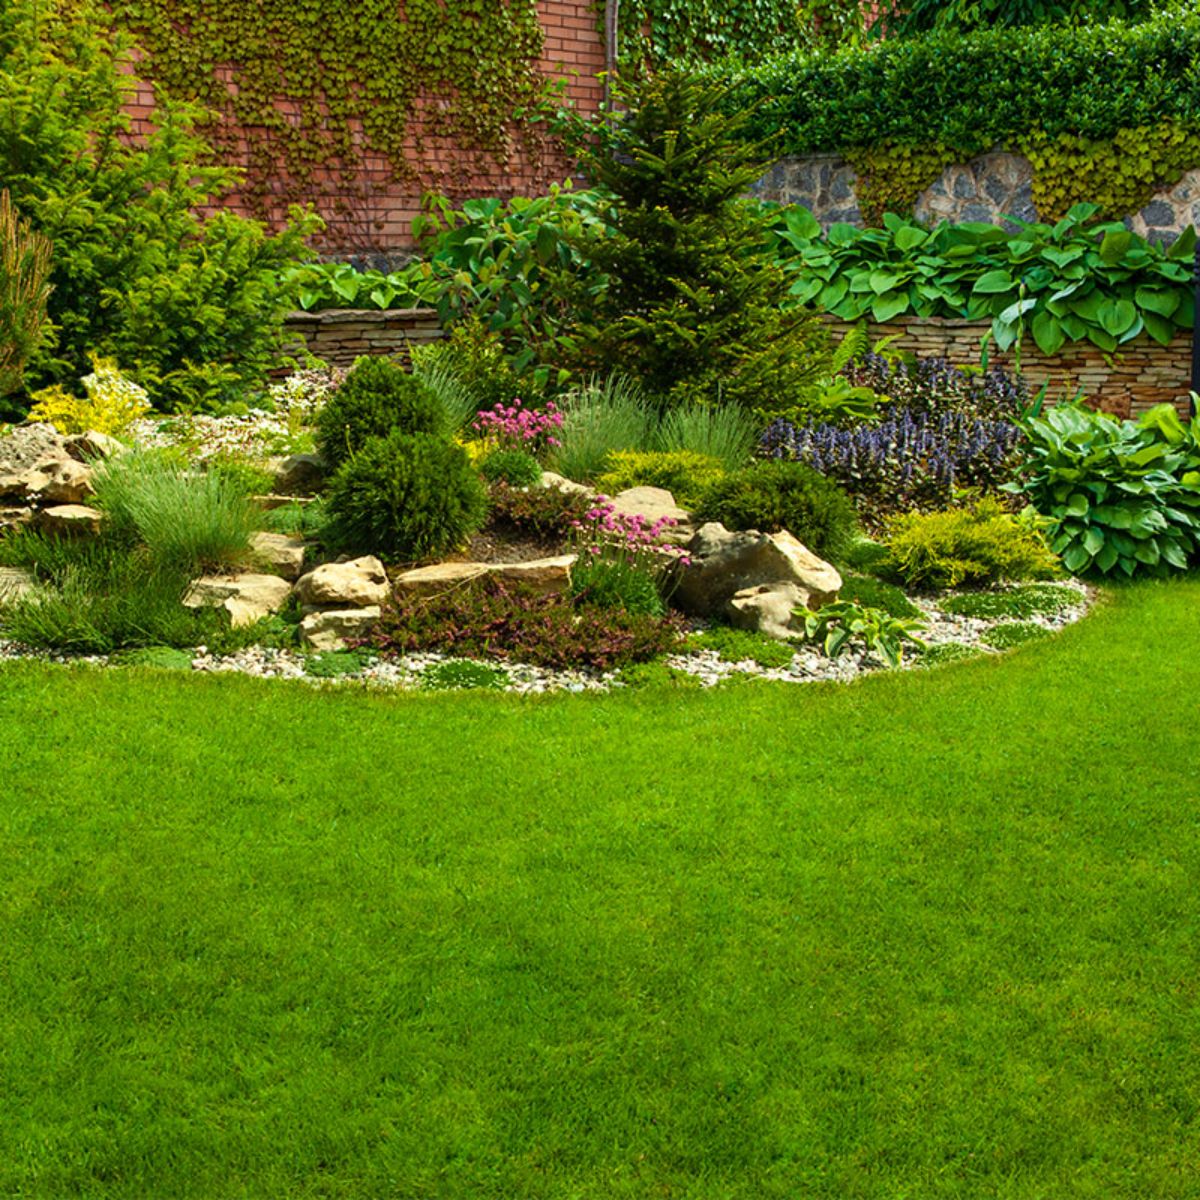 Got a Lawn & Bedding Project?